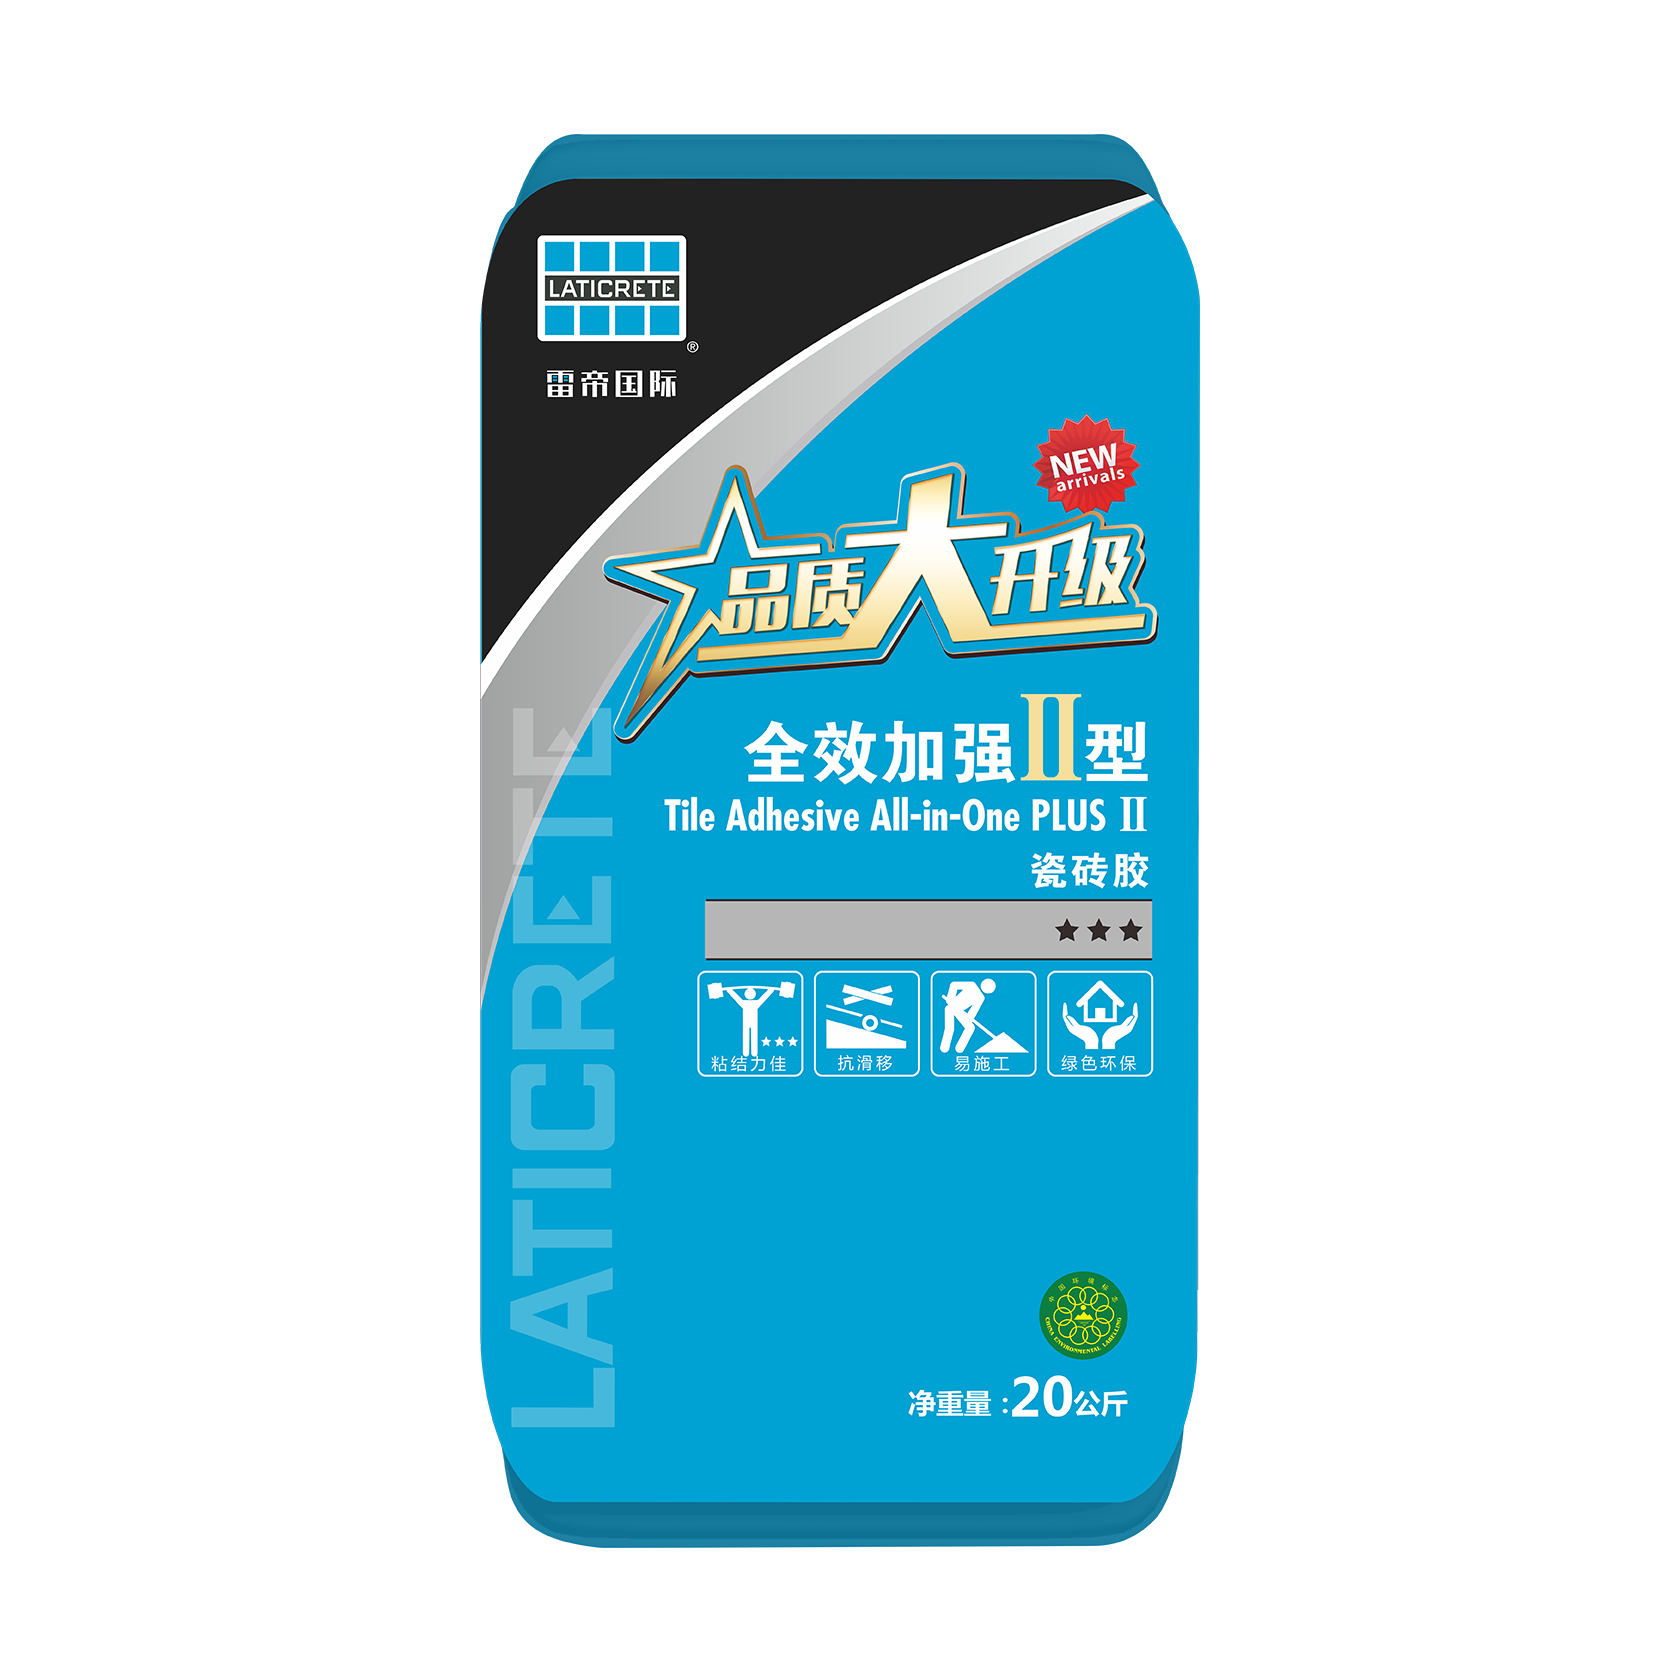 Tile Adhesive All in one Plus II